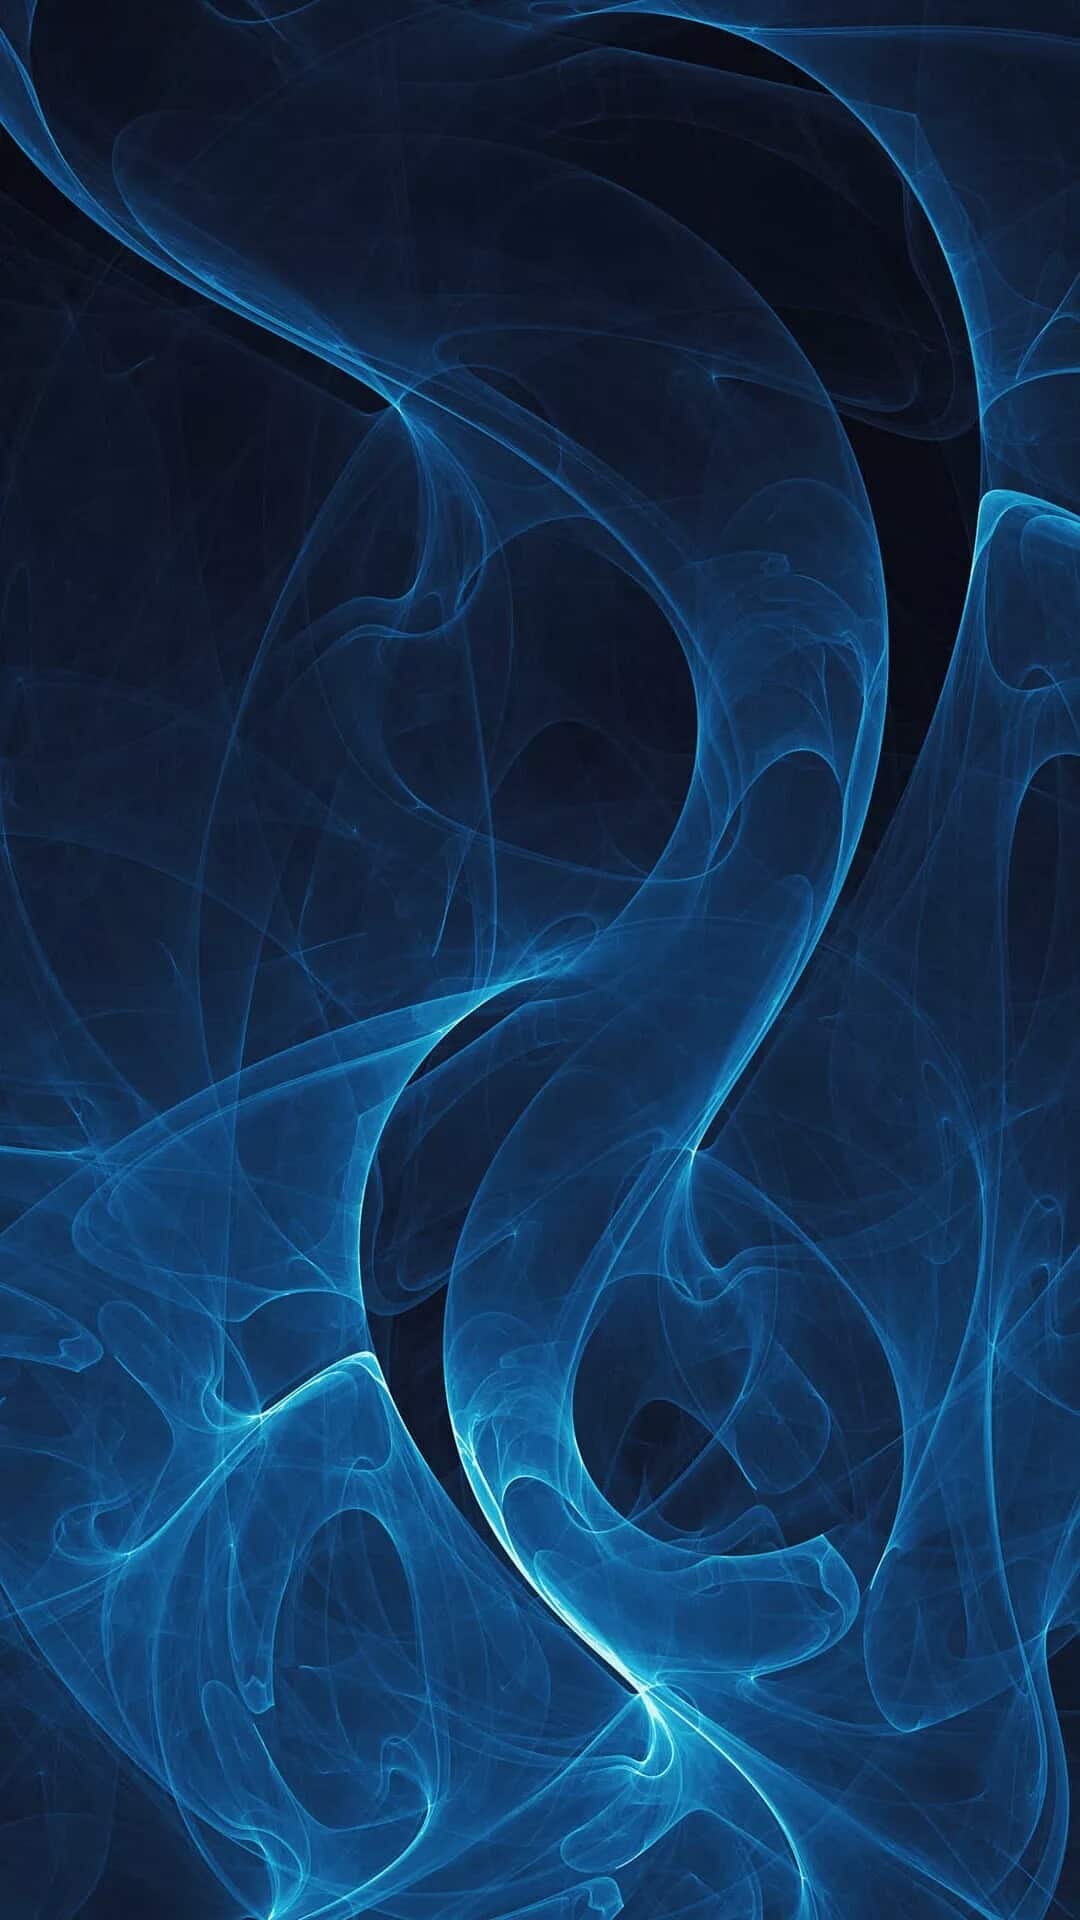 Elephone-P8-Wallpapers